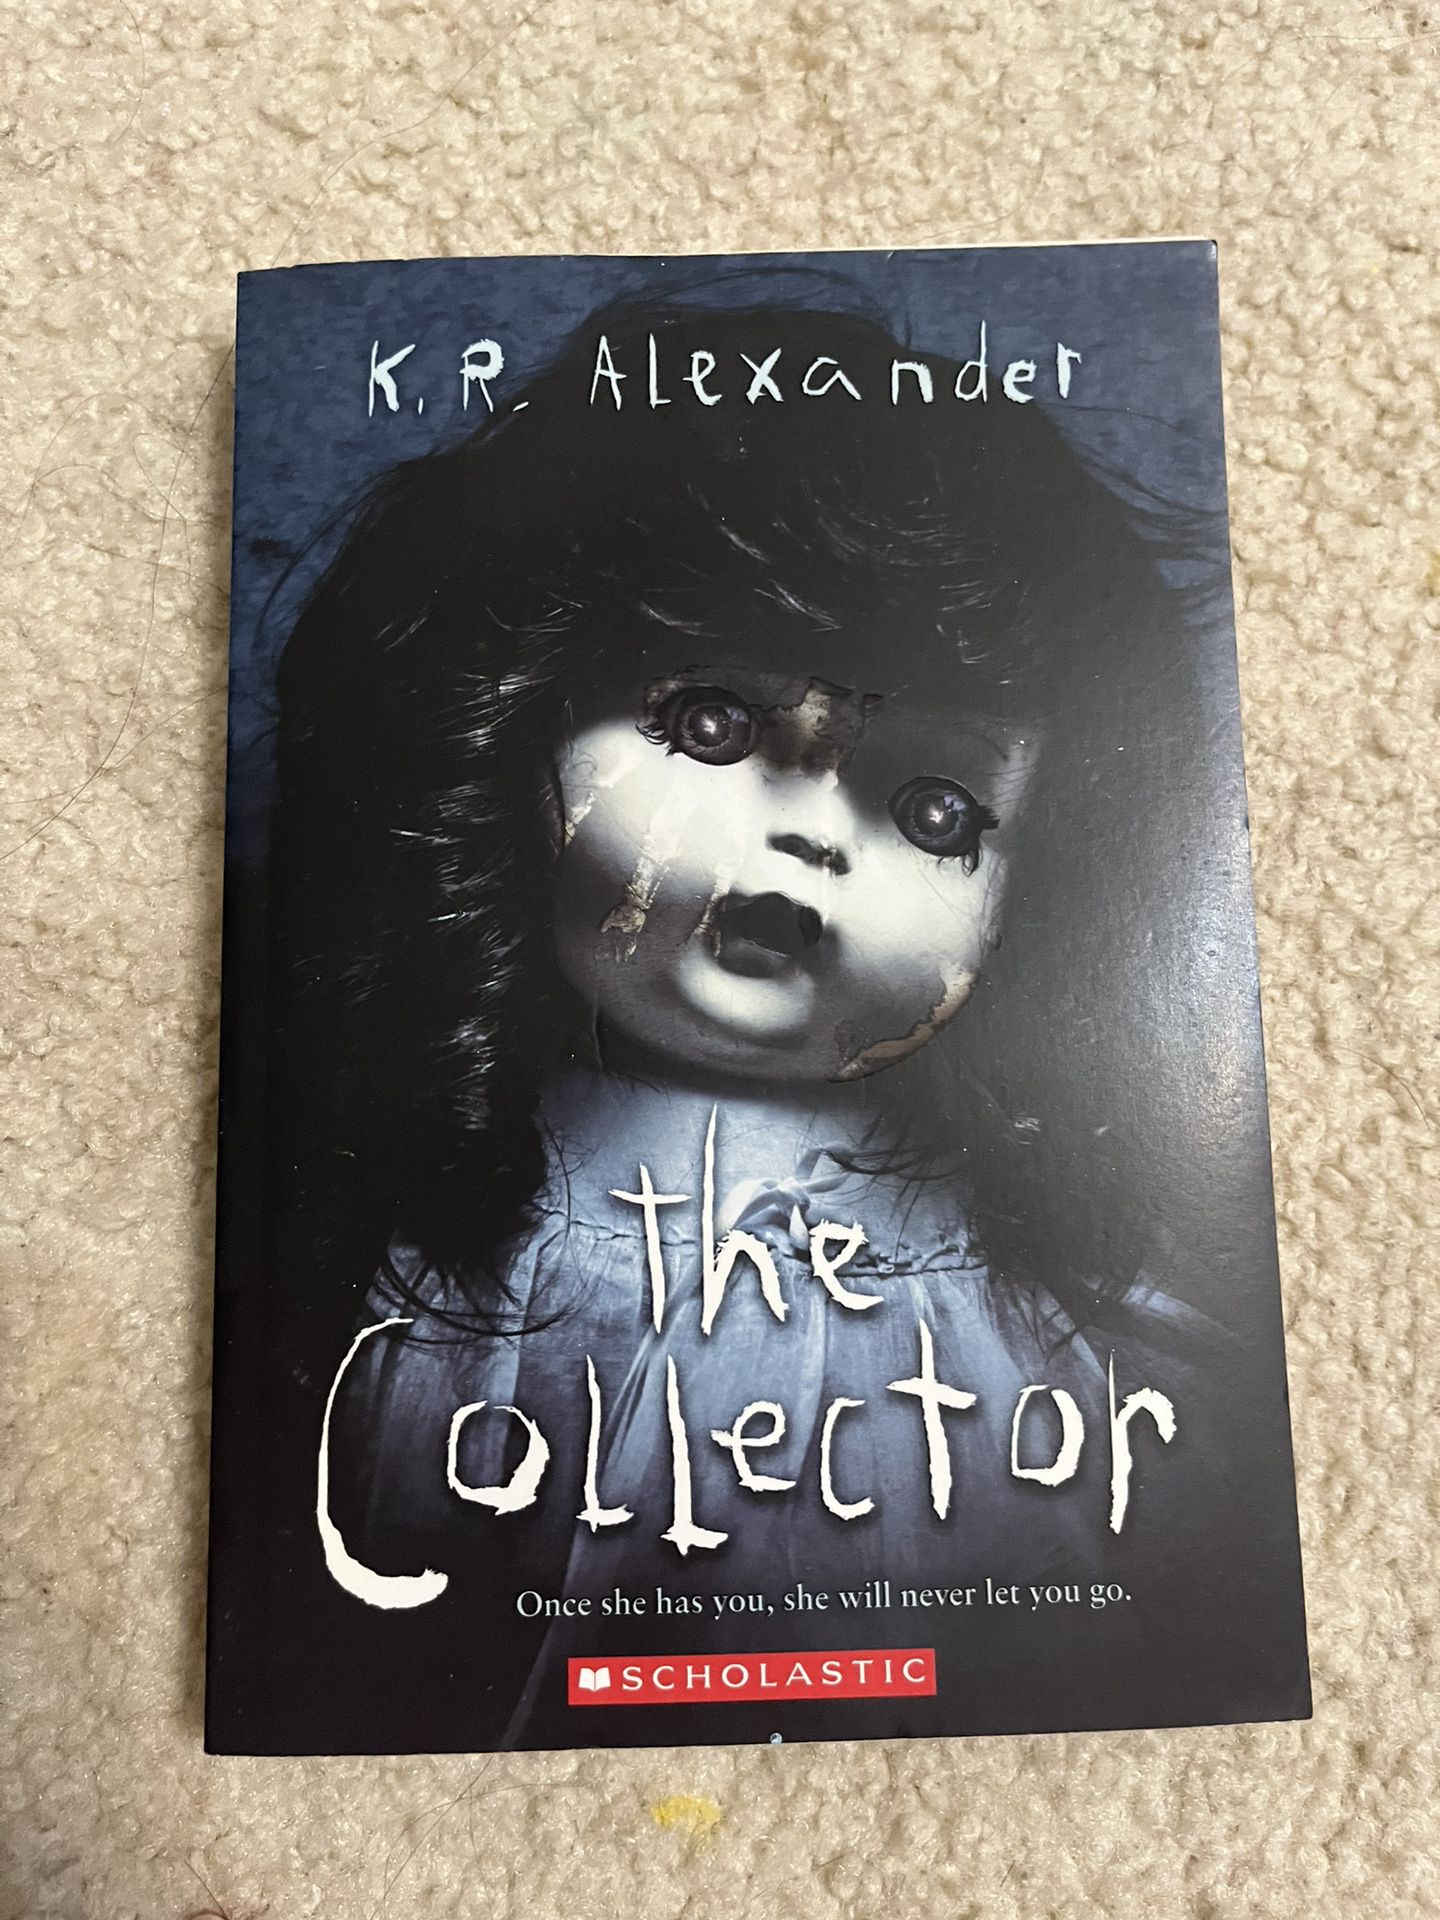 The collector by K.R. Alexander